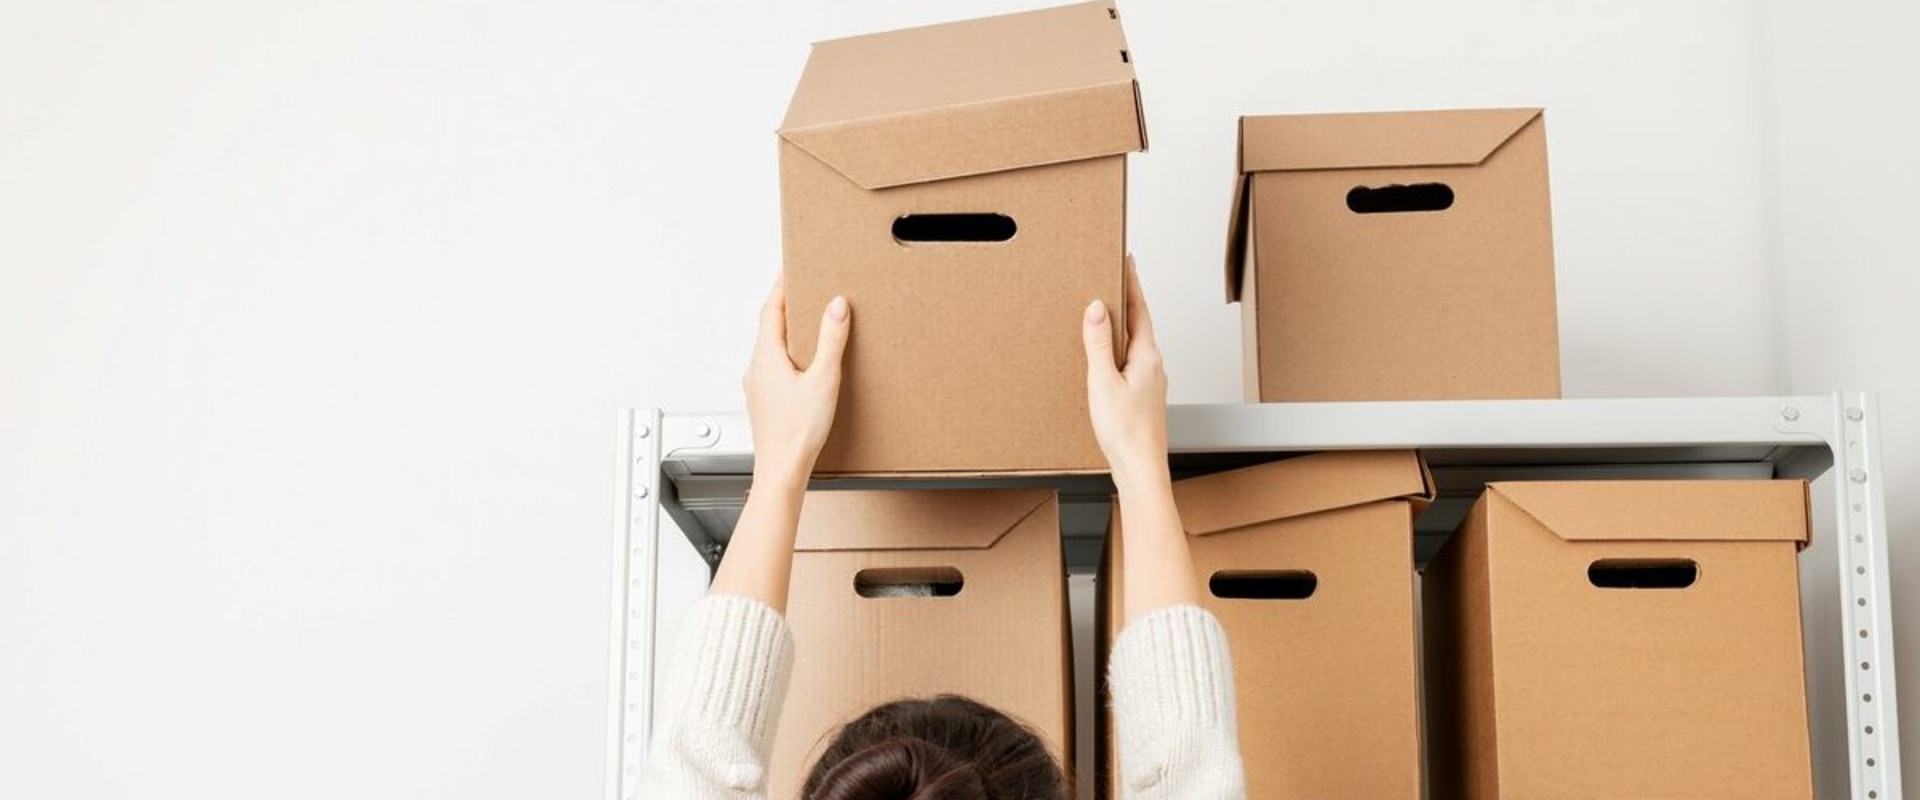 Maximizing Space in Boxes: Tips and Ideas for Organizing Your Storage Unit